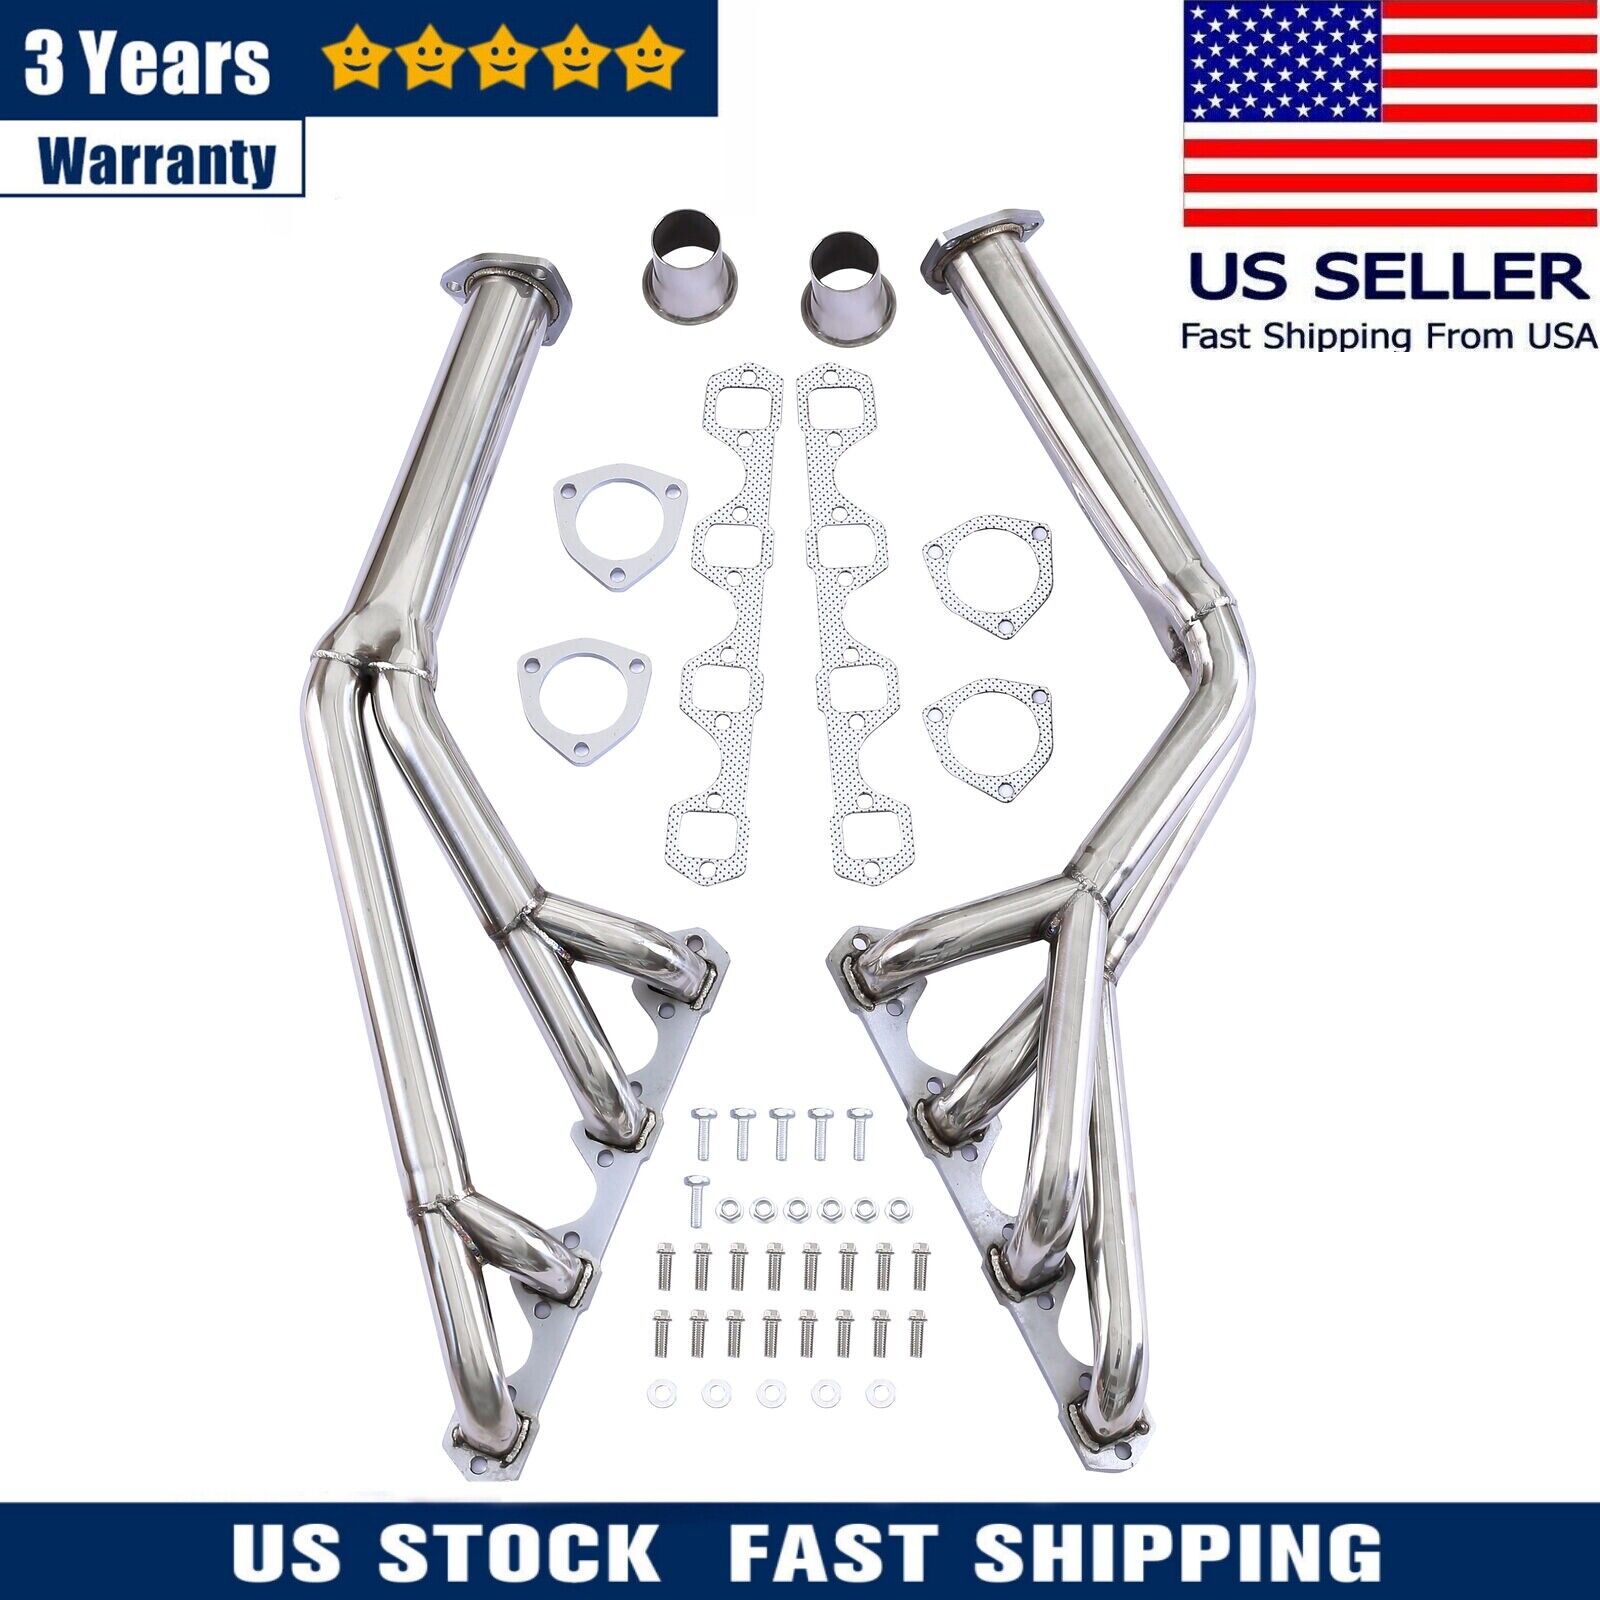 Stainless Steel Manifold Header For 64-70 Mustang 260/289/302 V8 Tri-y Header US